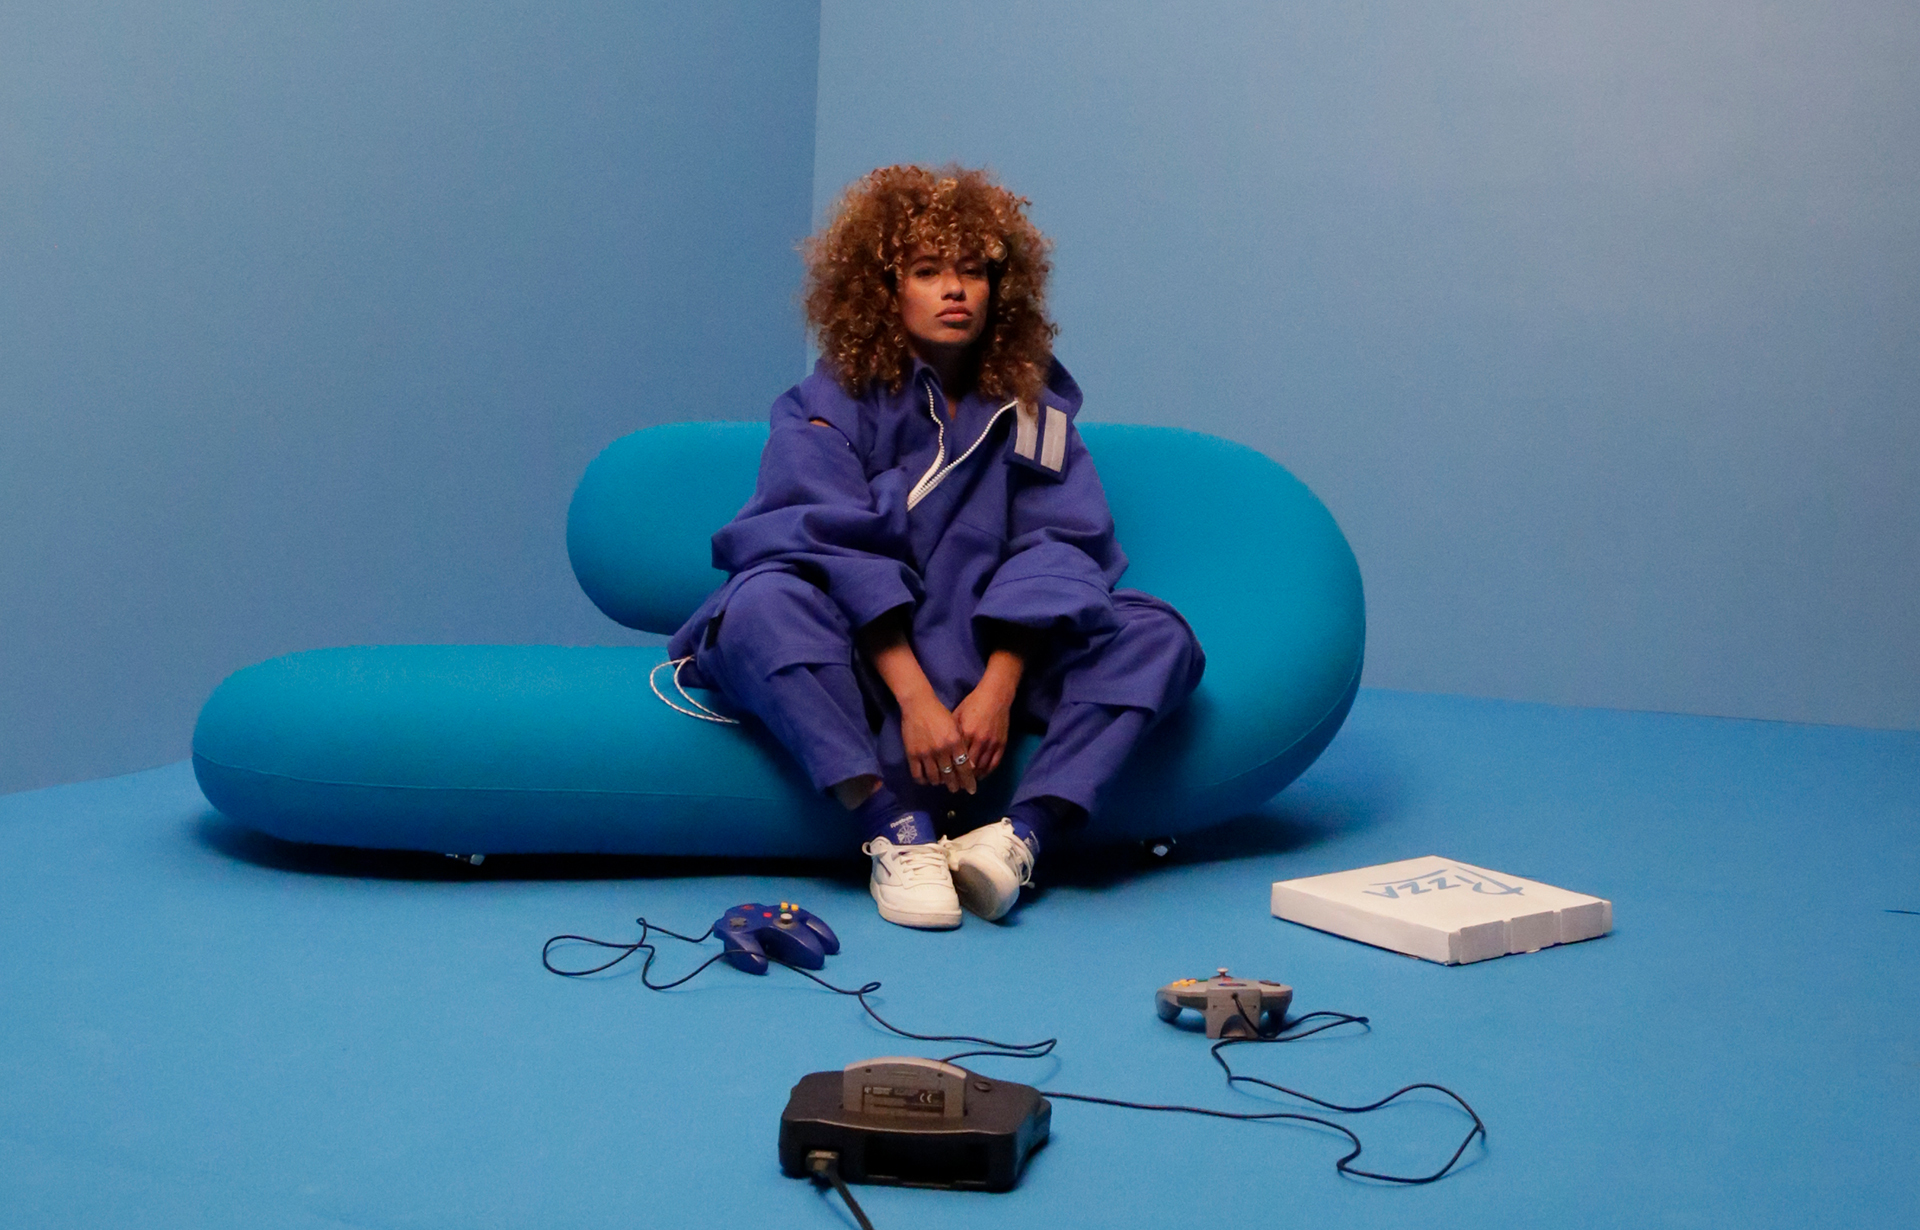 STARLEY UNVEILS COLOURFUL NEW VIDEO FOR ‘ONE OF ONE’